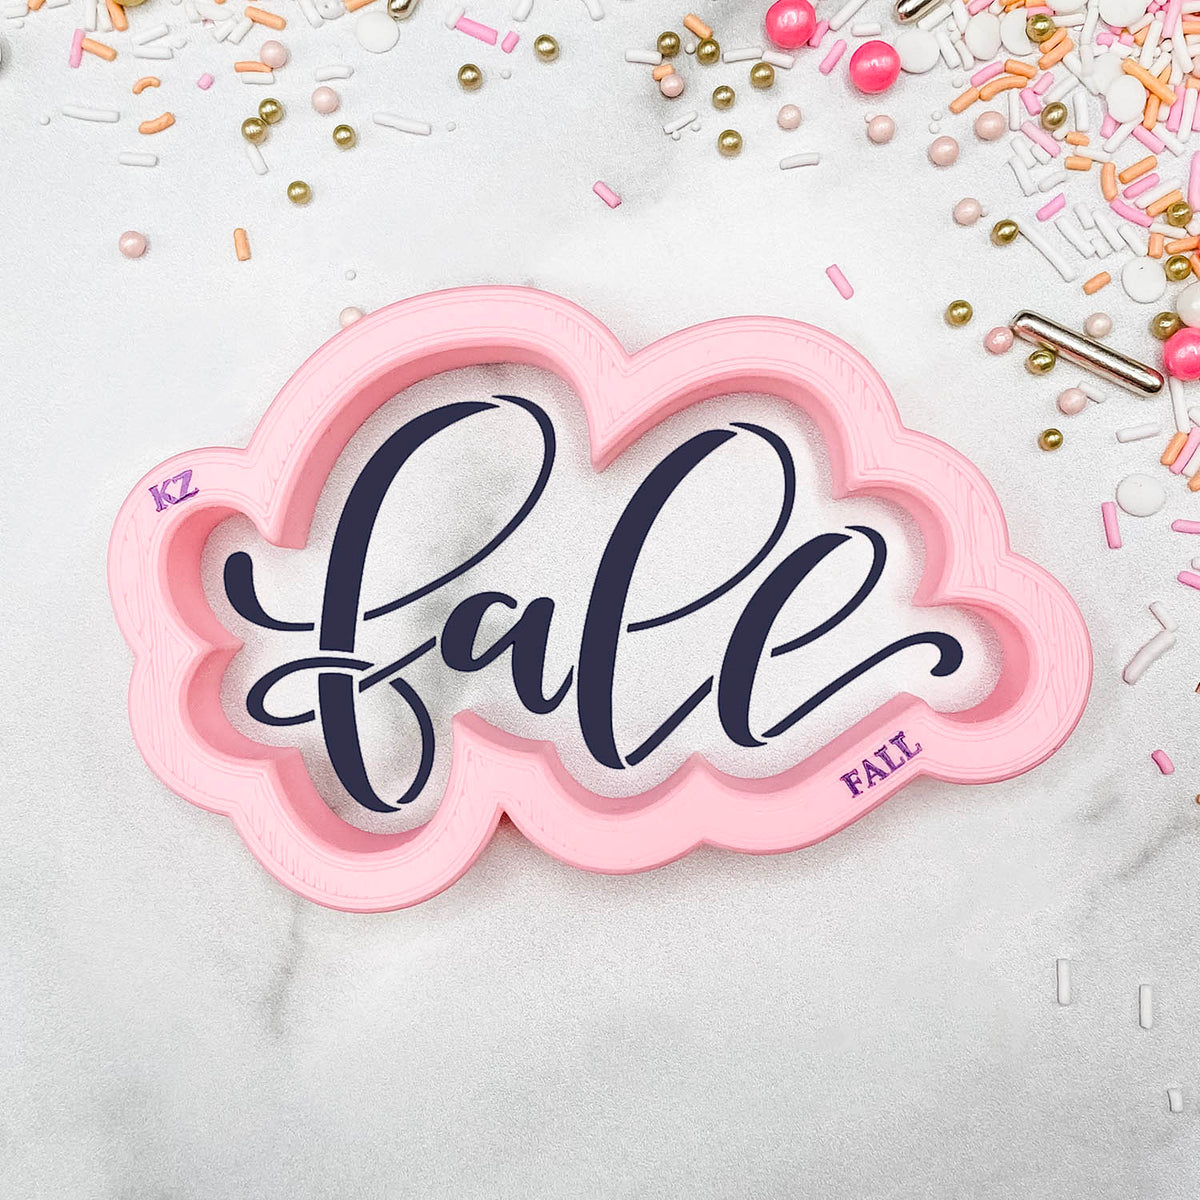 Cookie Cutters Fall Hand Lettered